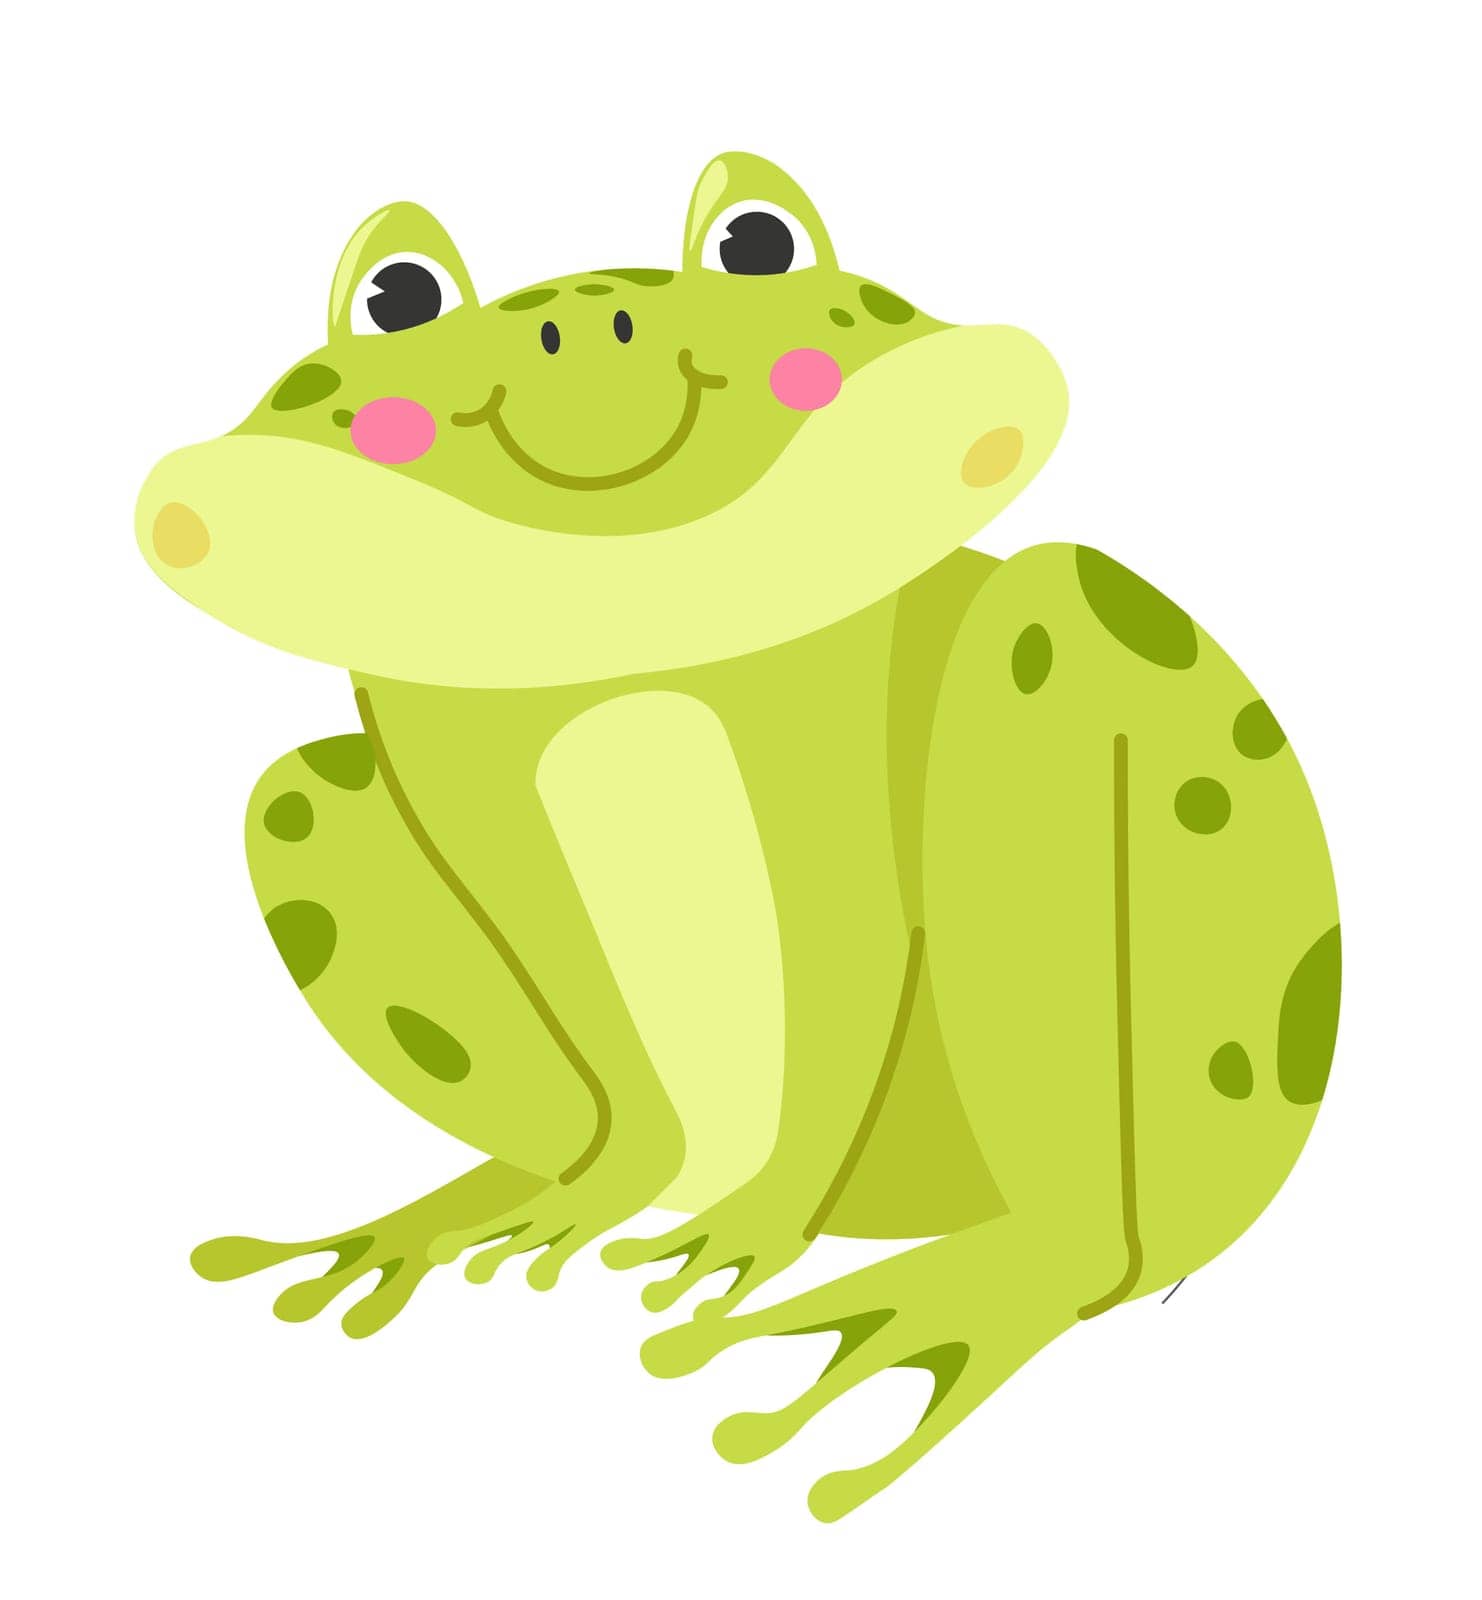 Frog character with smiling facial expression by Sonulkaster